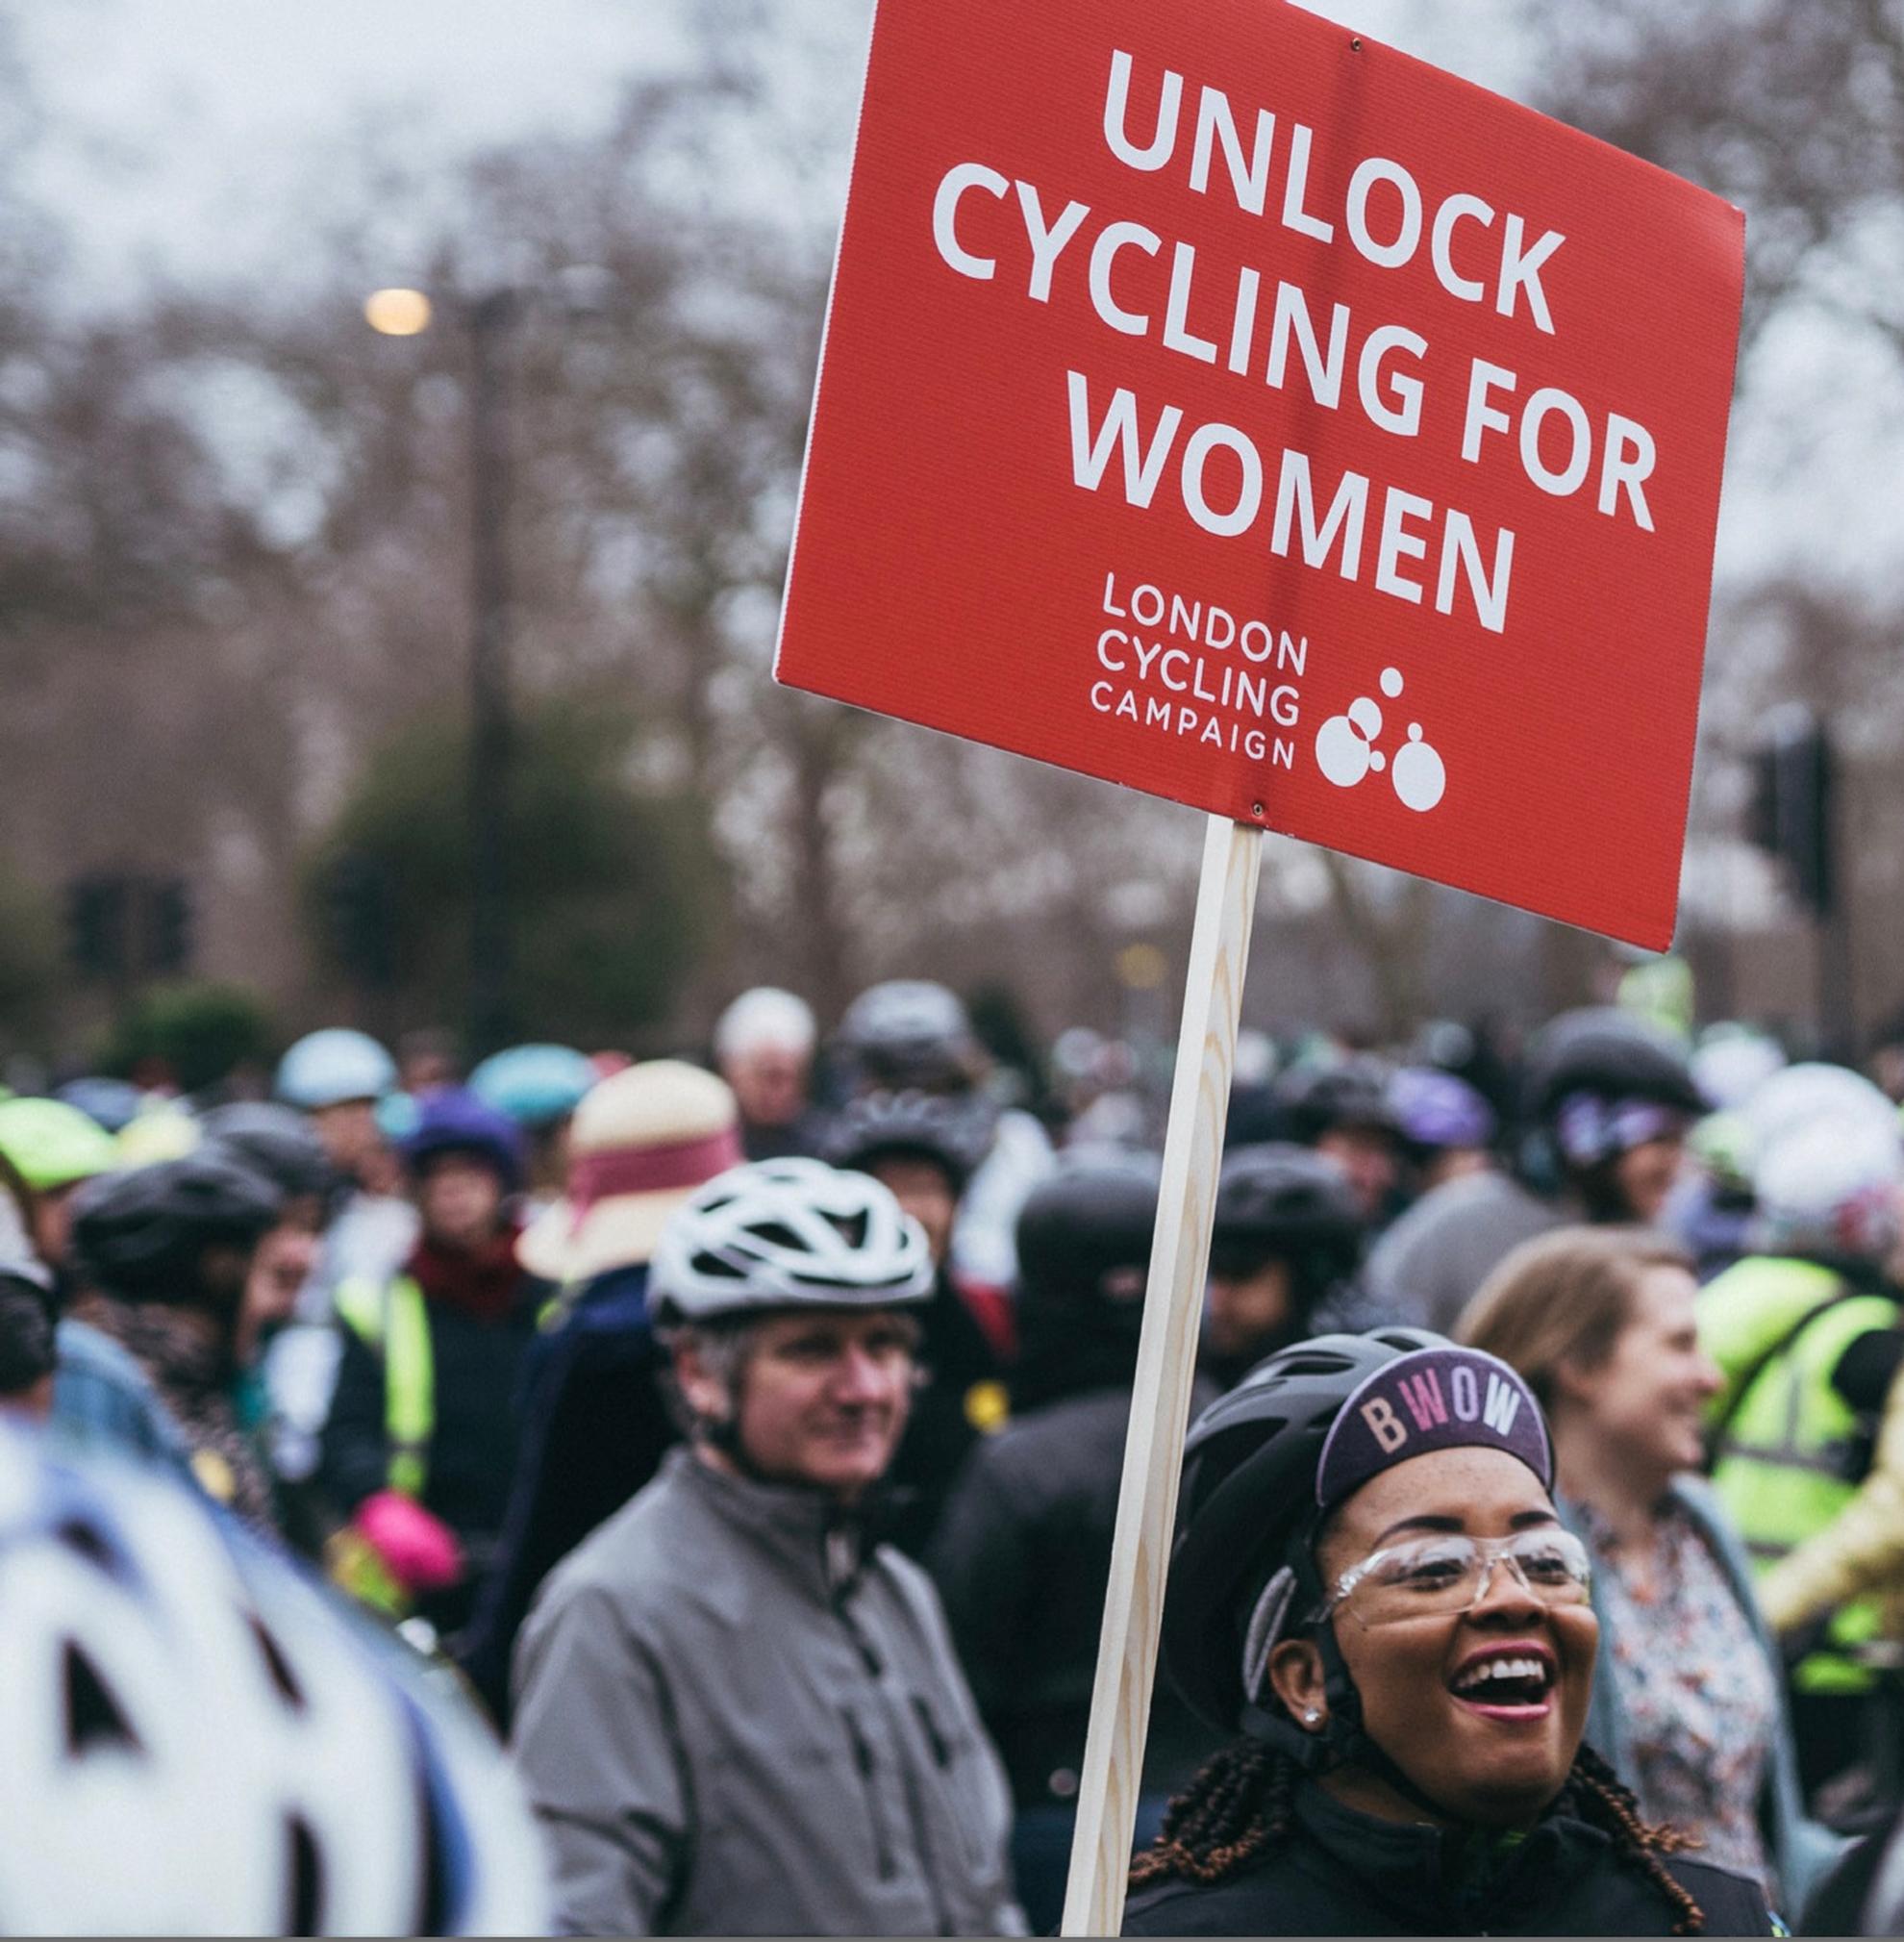 Nearly half of women in the LCC survey said that good cycle infrastructure would help them switch to cycling from other forms of transport for local journeys